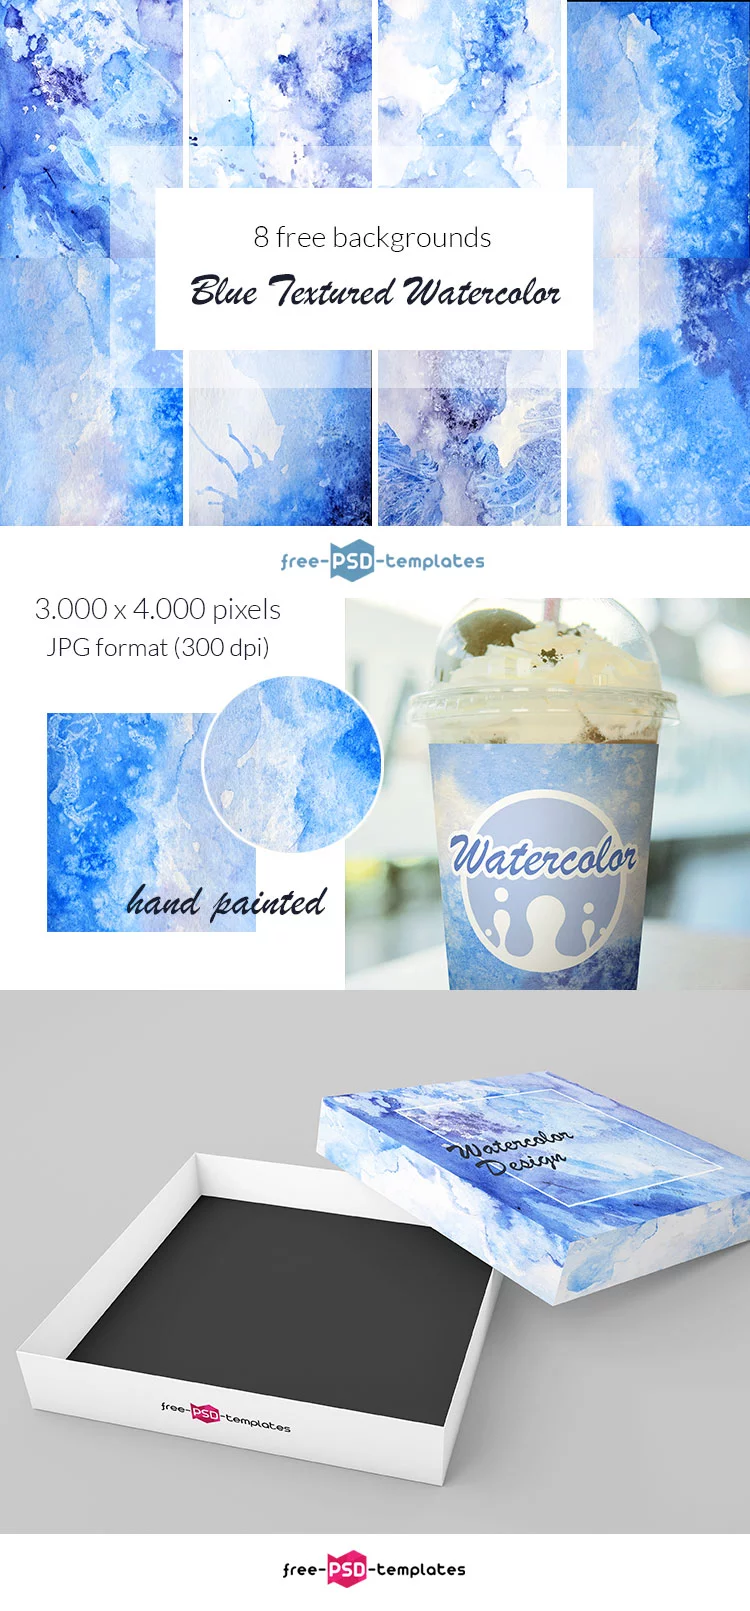 Free Blue Textured Watercolor